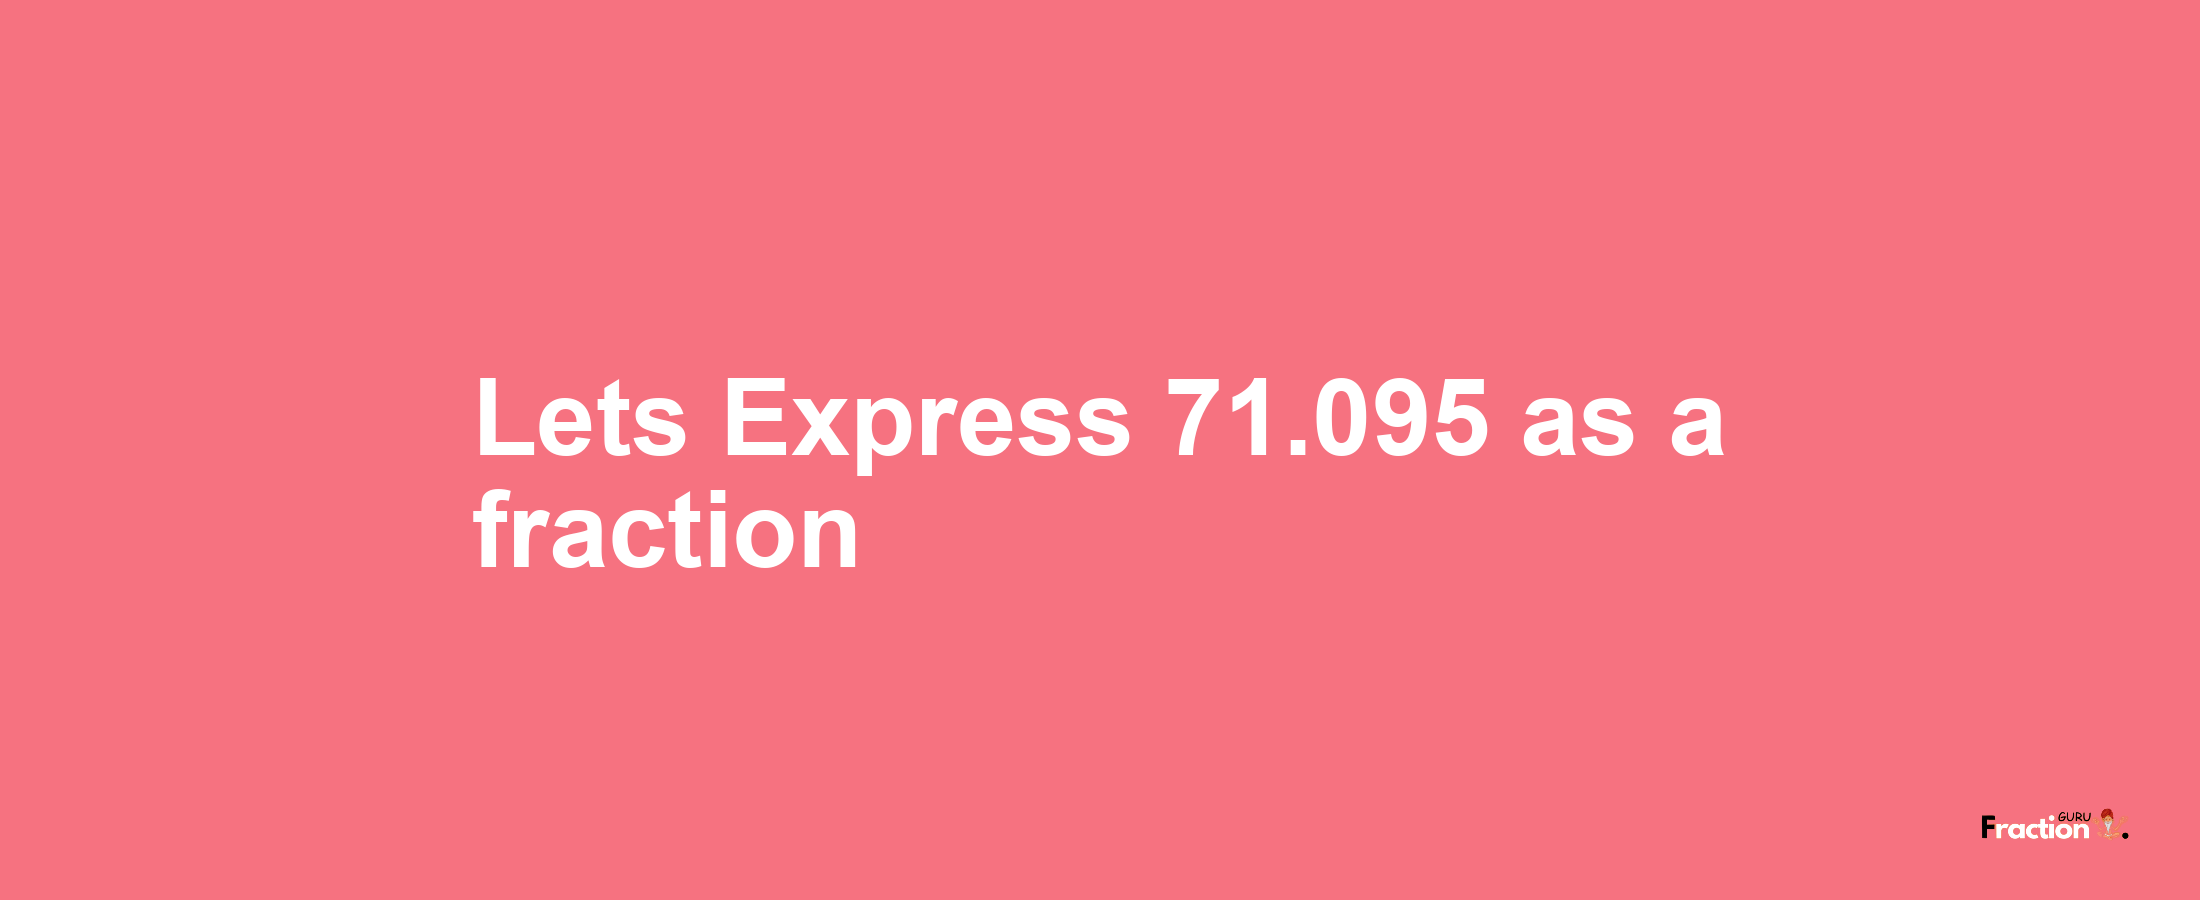 Lets Express 71.095 as afraction